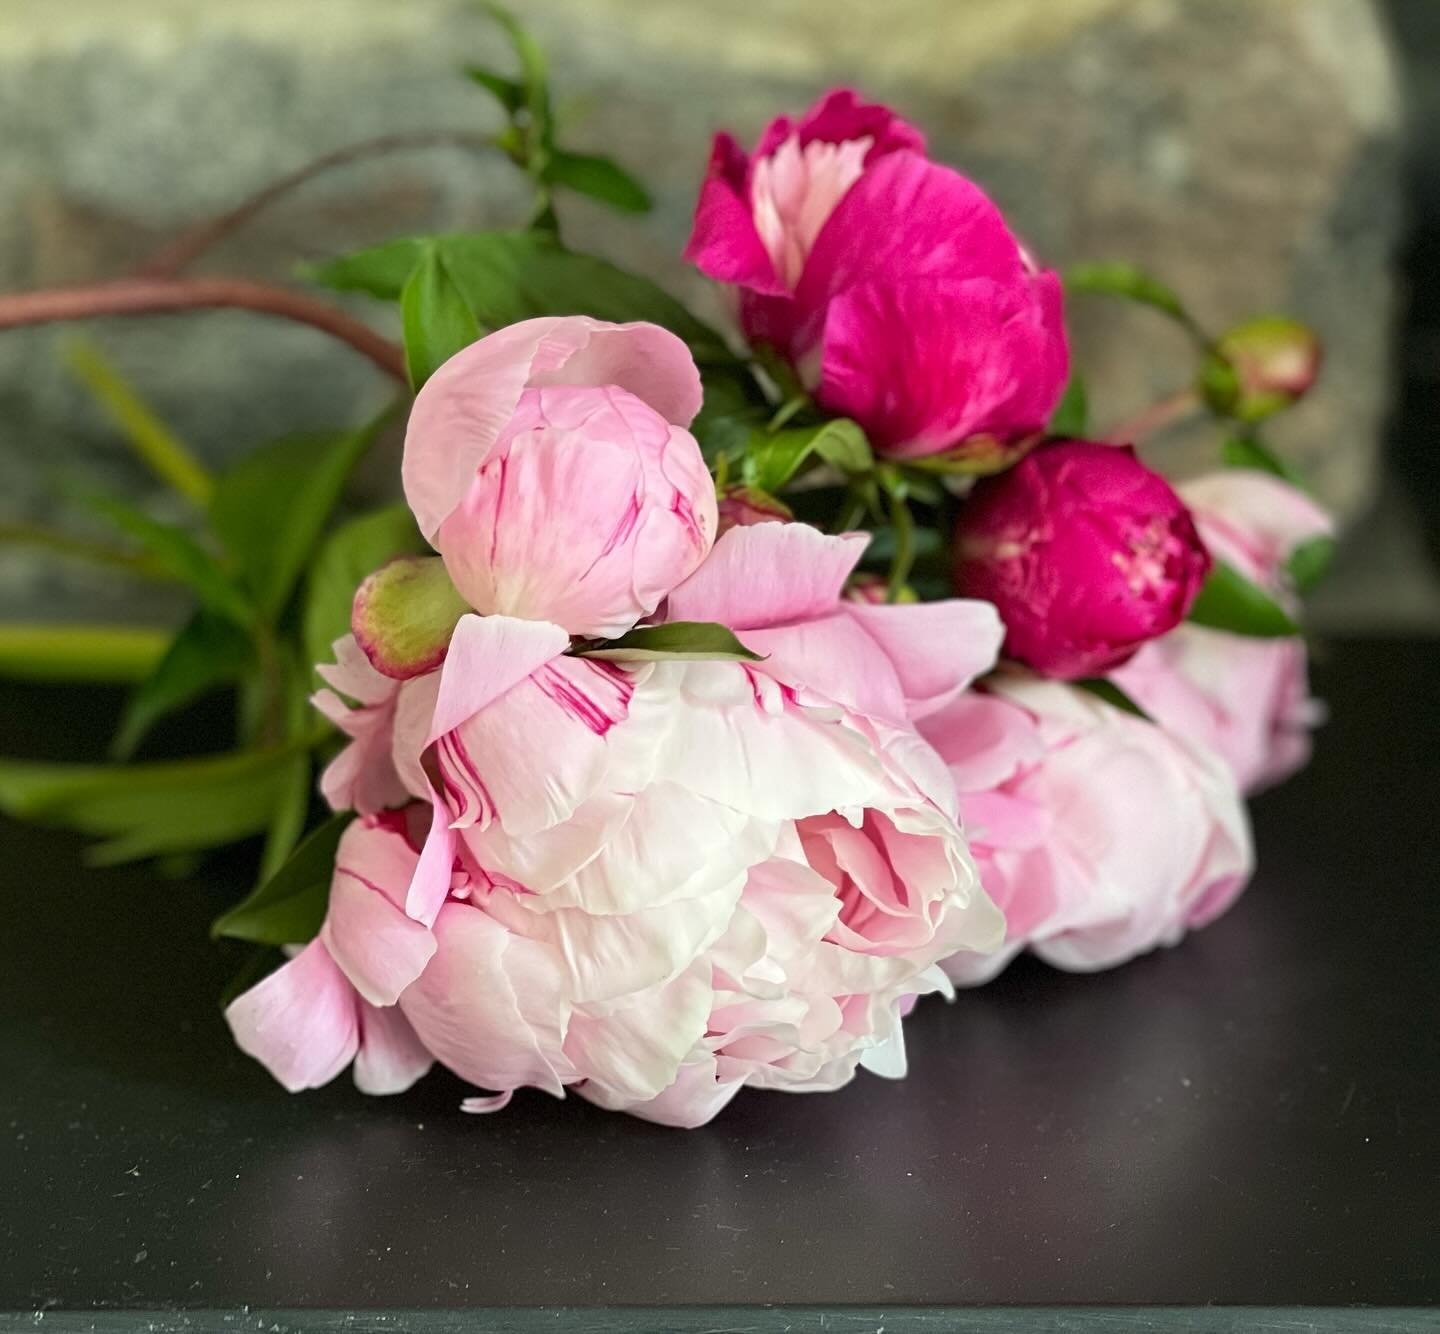 Extra peony bunches available tomorrow for non-CSA members.  If you would like to reserve a bouquet please message me and I will add to the CSA side for reservation!  Enjoy the weekend! #frescheflowers